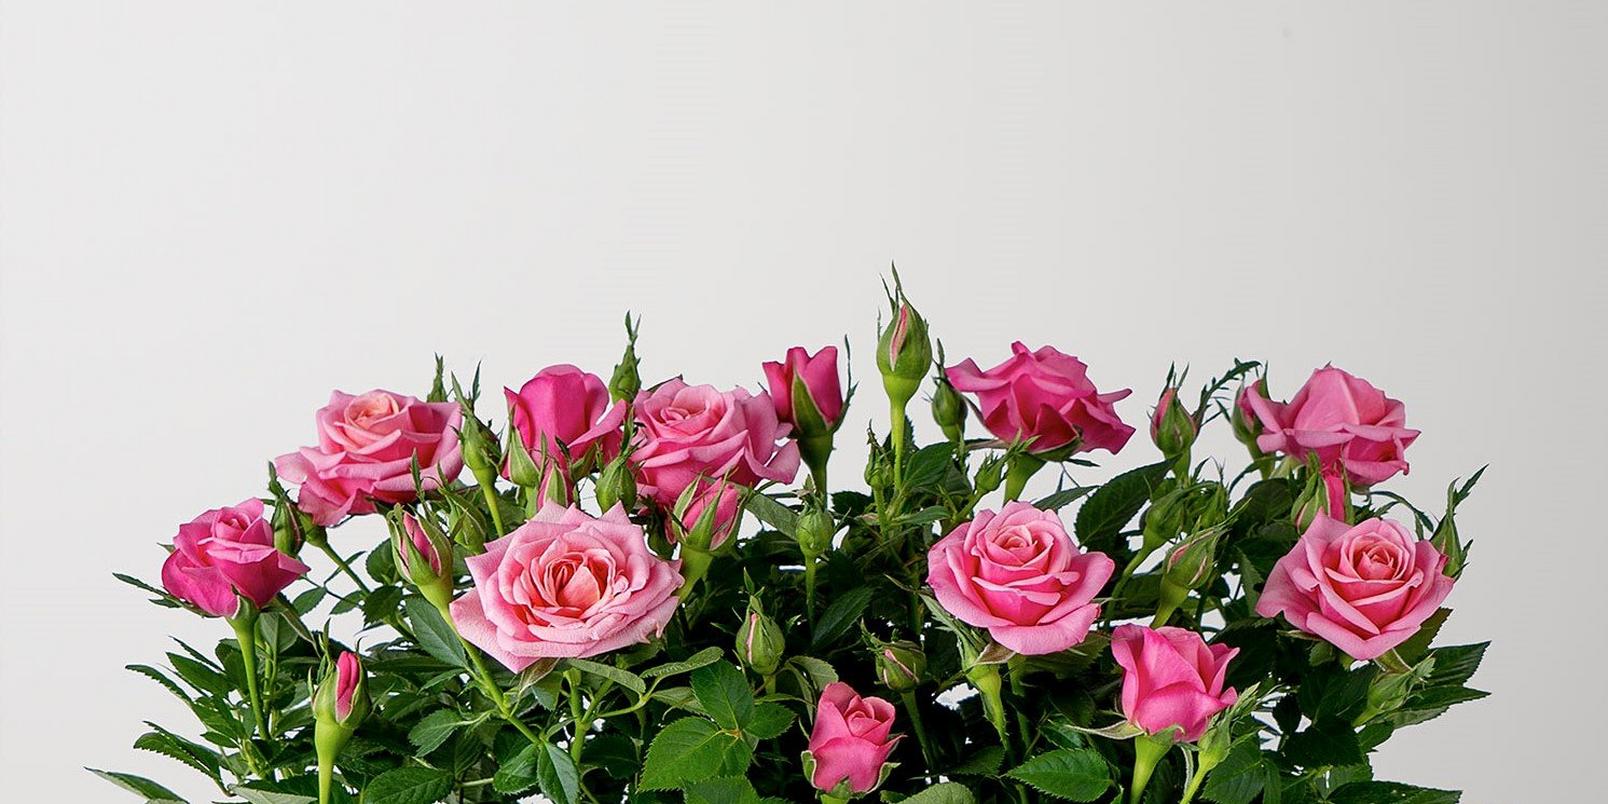 rose-pink-plants-in-tin